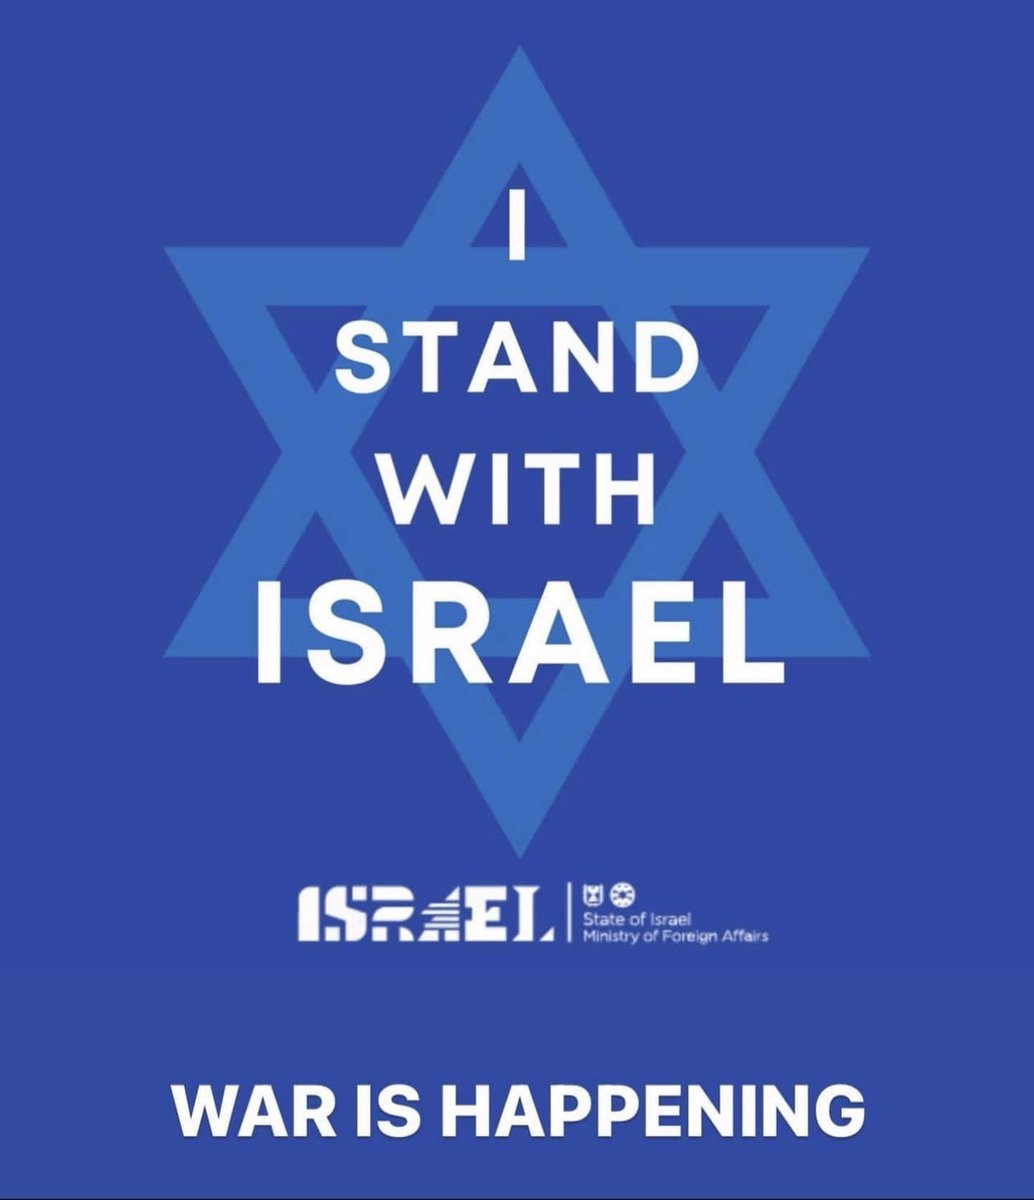 This is war and the only acceptable outcome is a win for Israel.  NO CEASE FIRE! NO TWO STATE SOLUTION! Radical islamic terrorists  are being eradicated as i type. #JewishPower #JewishPride #Jew